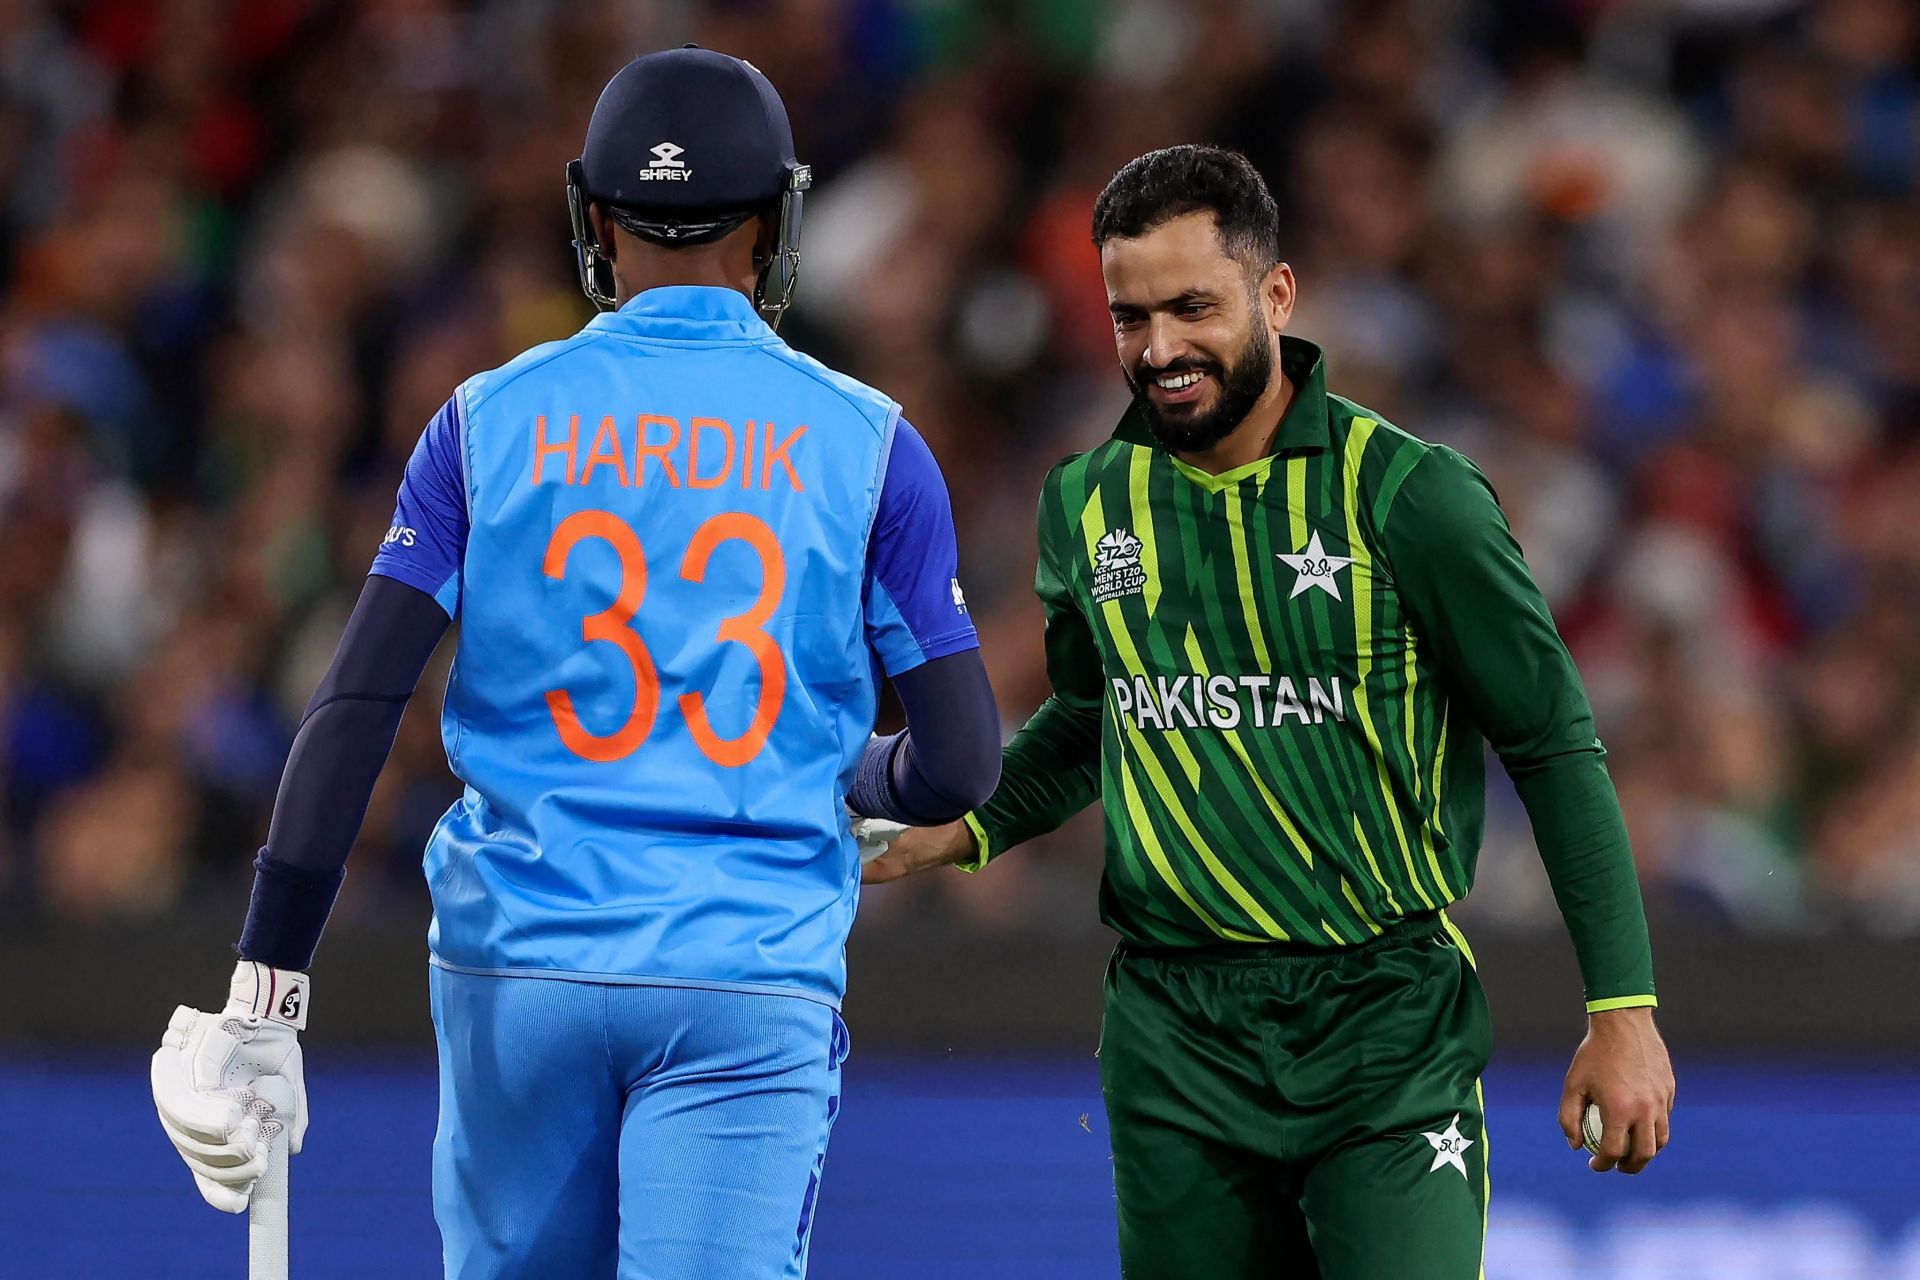 Hardik Pandya took three wickets and hit 41 as India made a winning start to the 2022 T20 World Cup